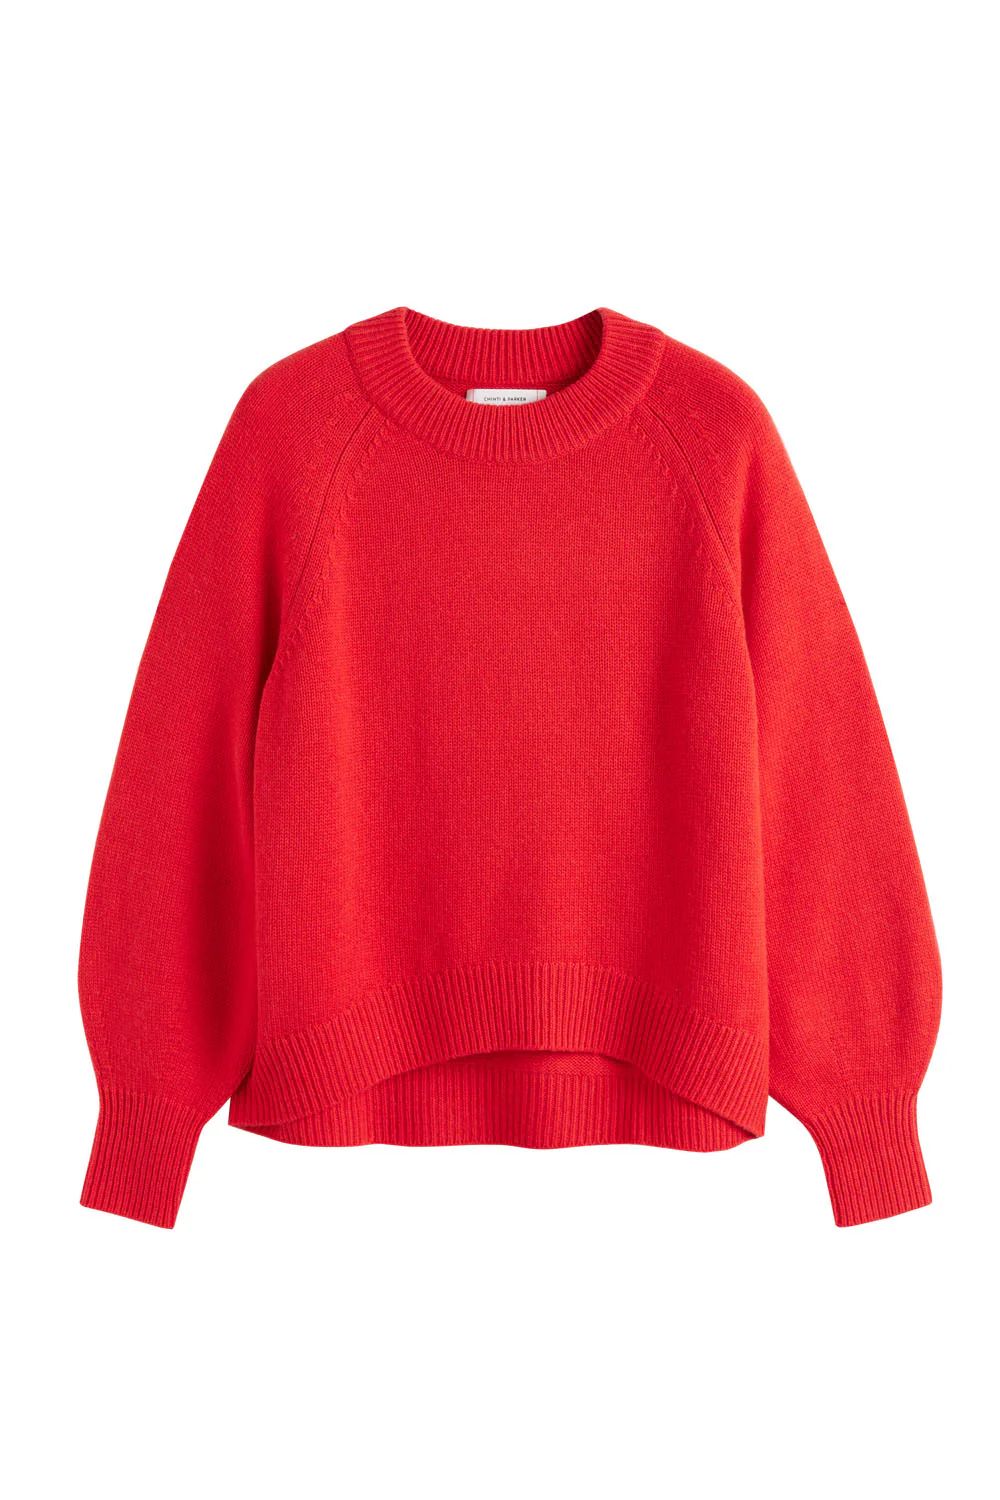 Red Wool-Cashmere Saddle Sleeve Sweater | Chinti and Parker